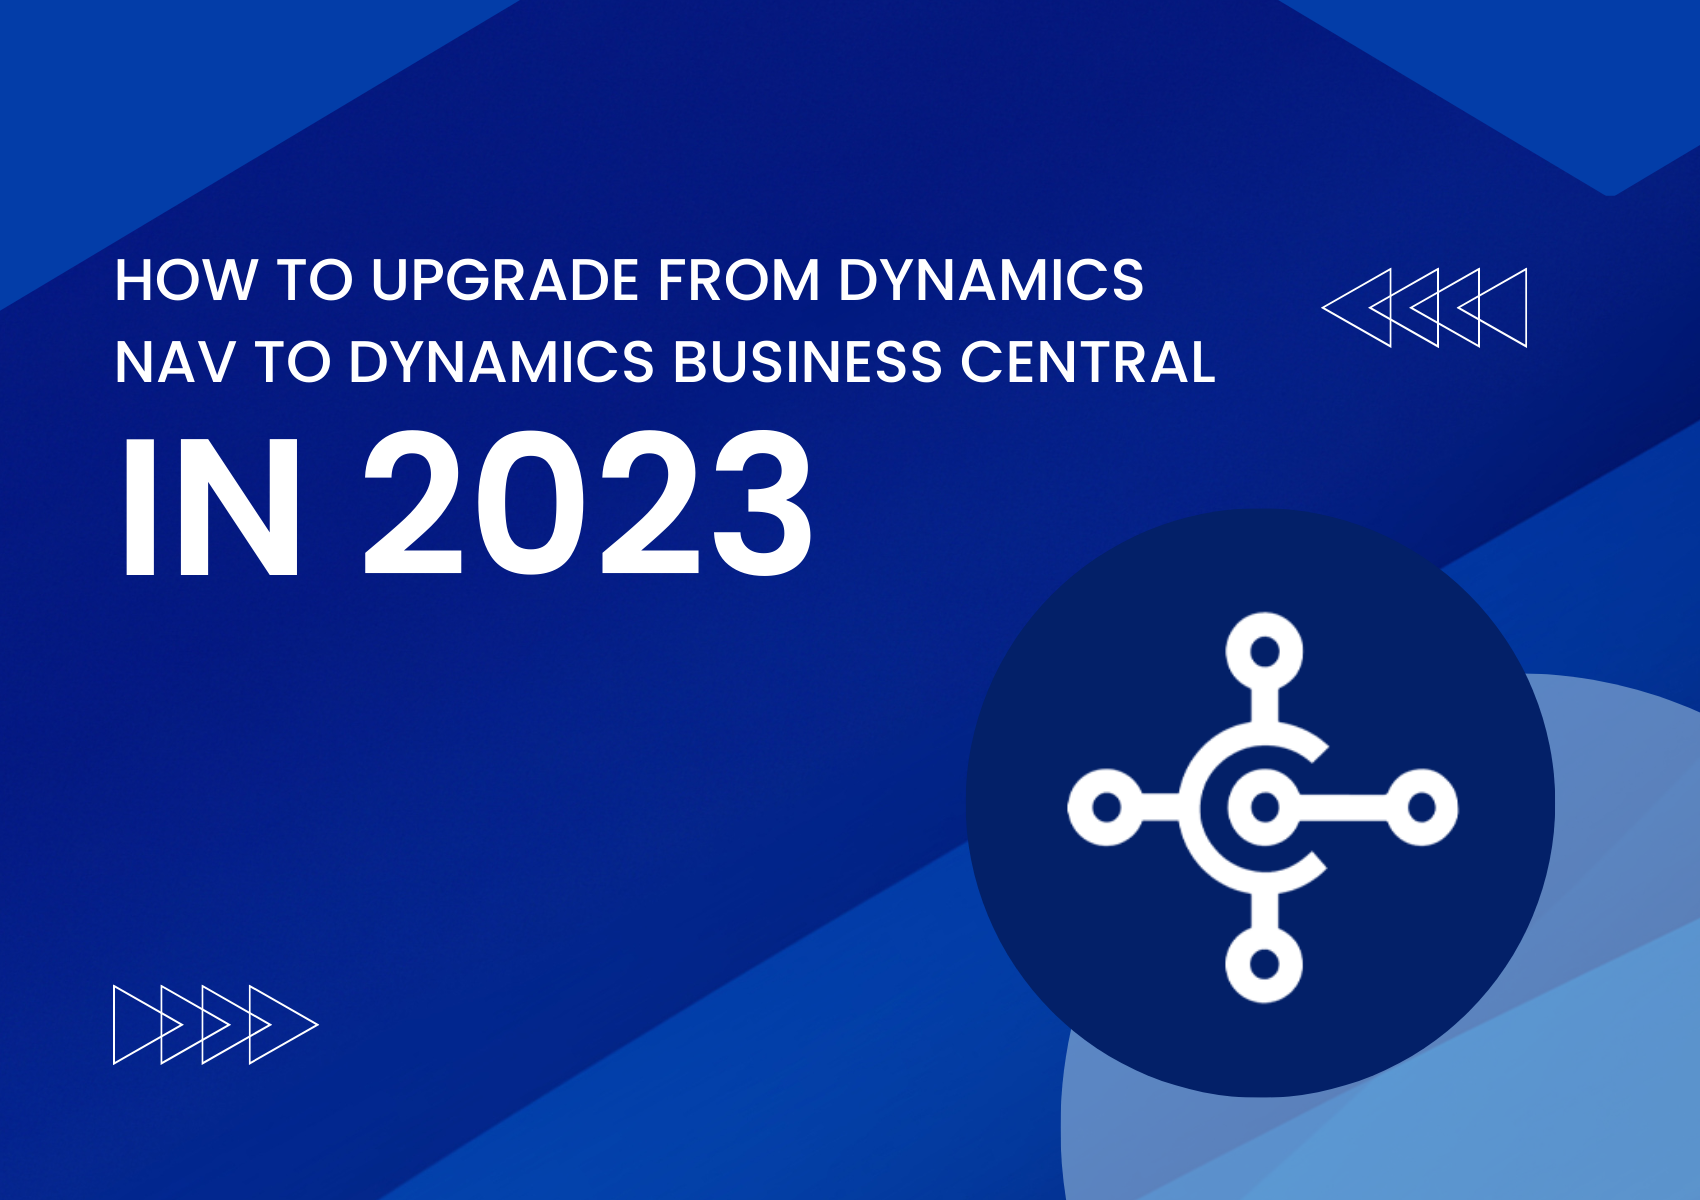 Upgrading from Dynamics NAV to Business Central